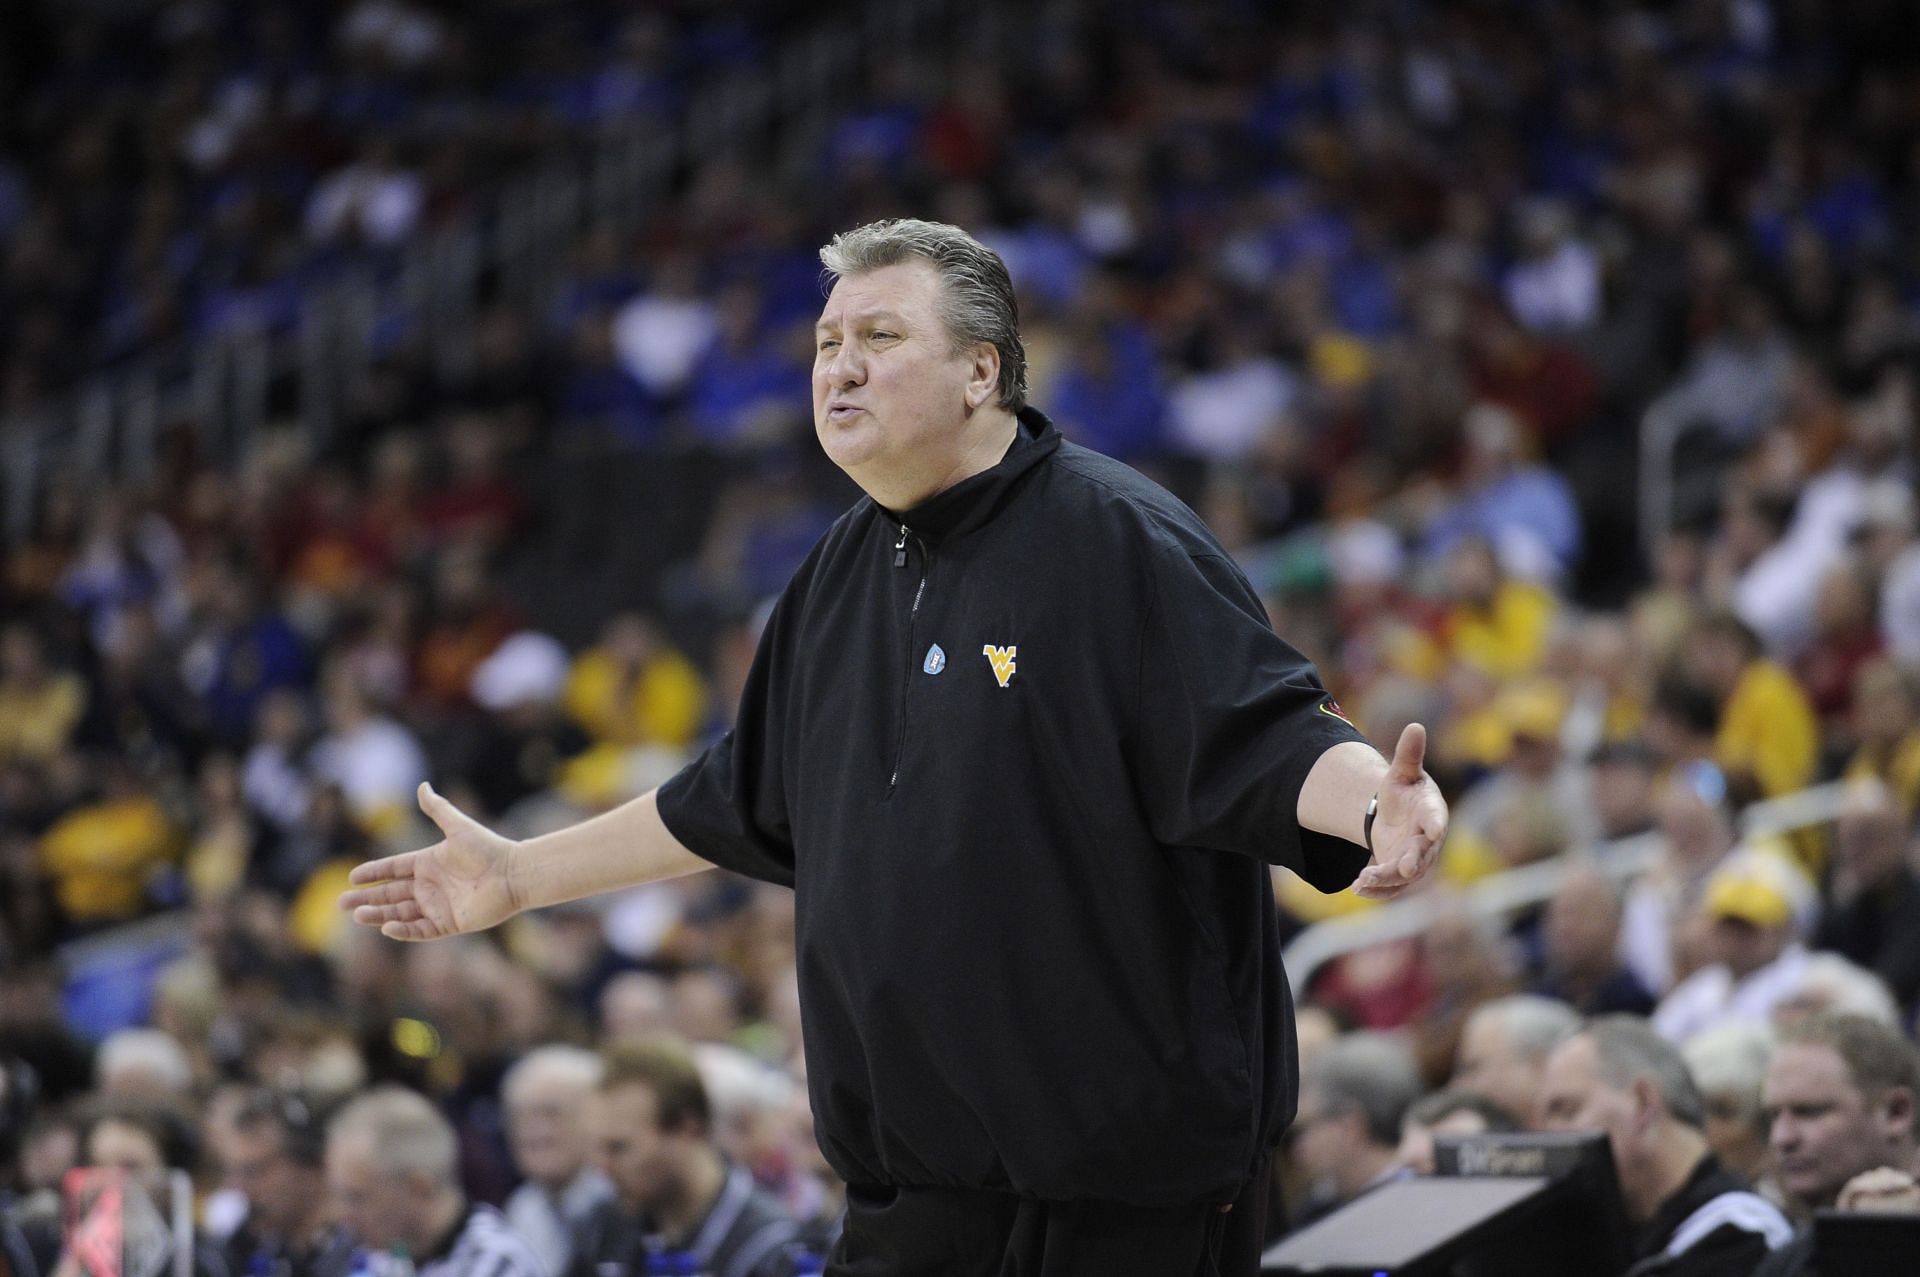 Bob Huggins&#039; salary cut by $1M after homophobic comments